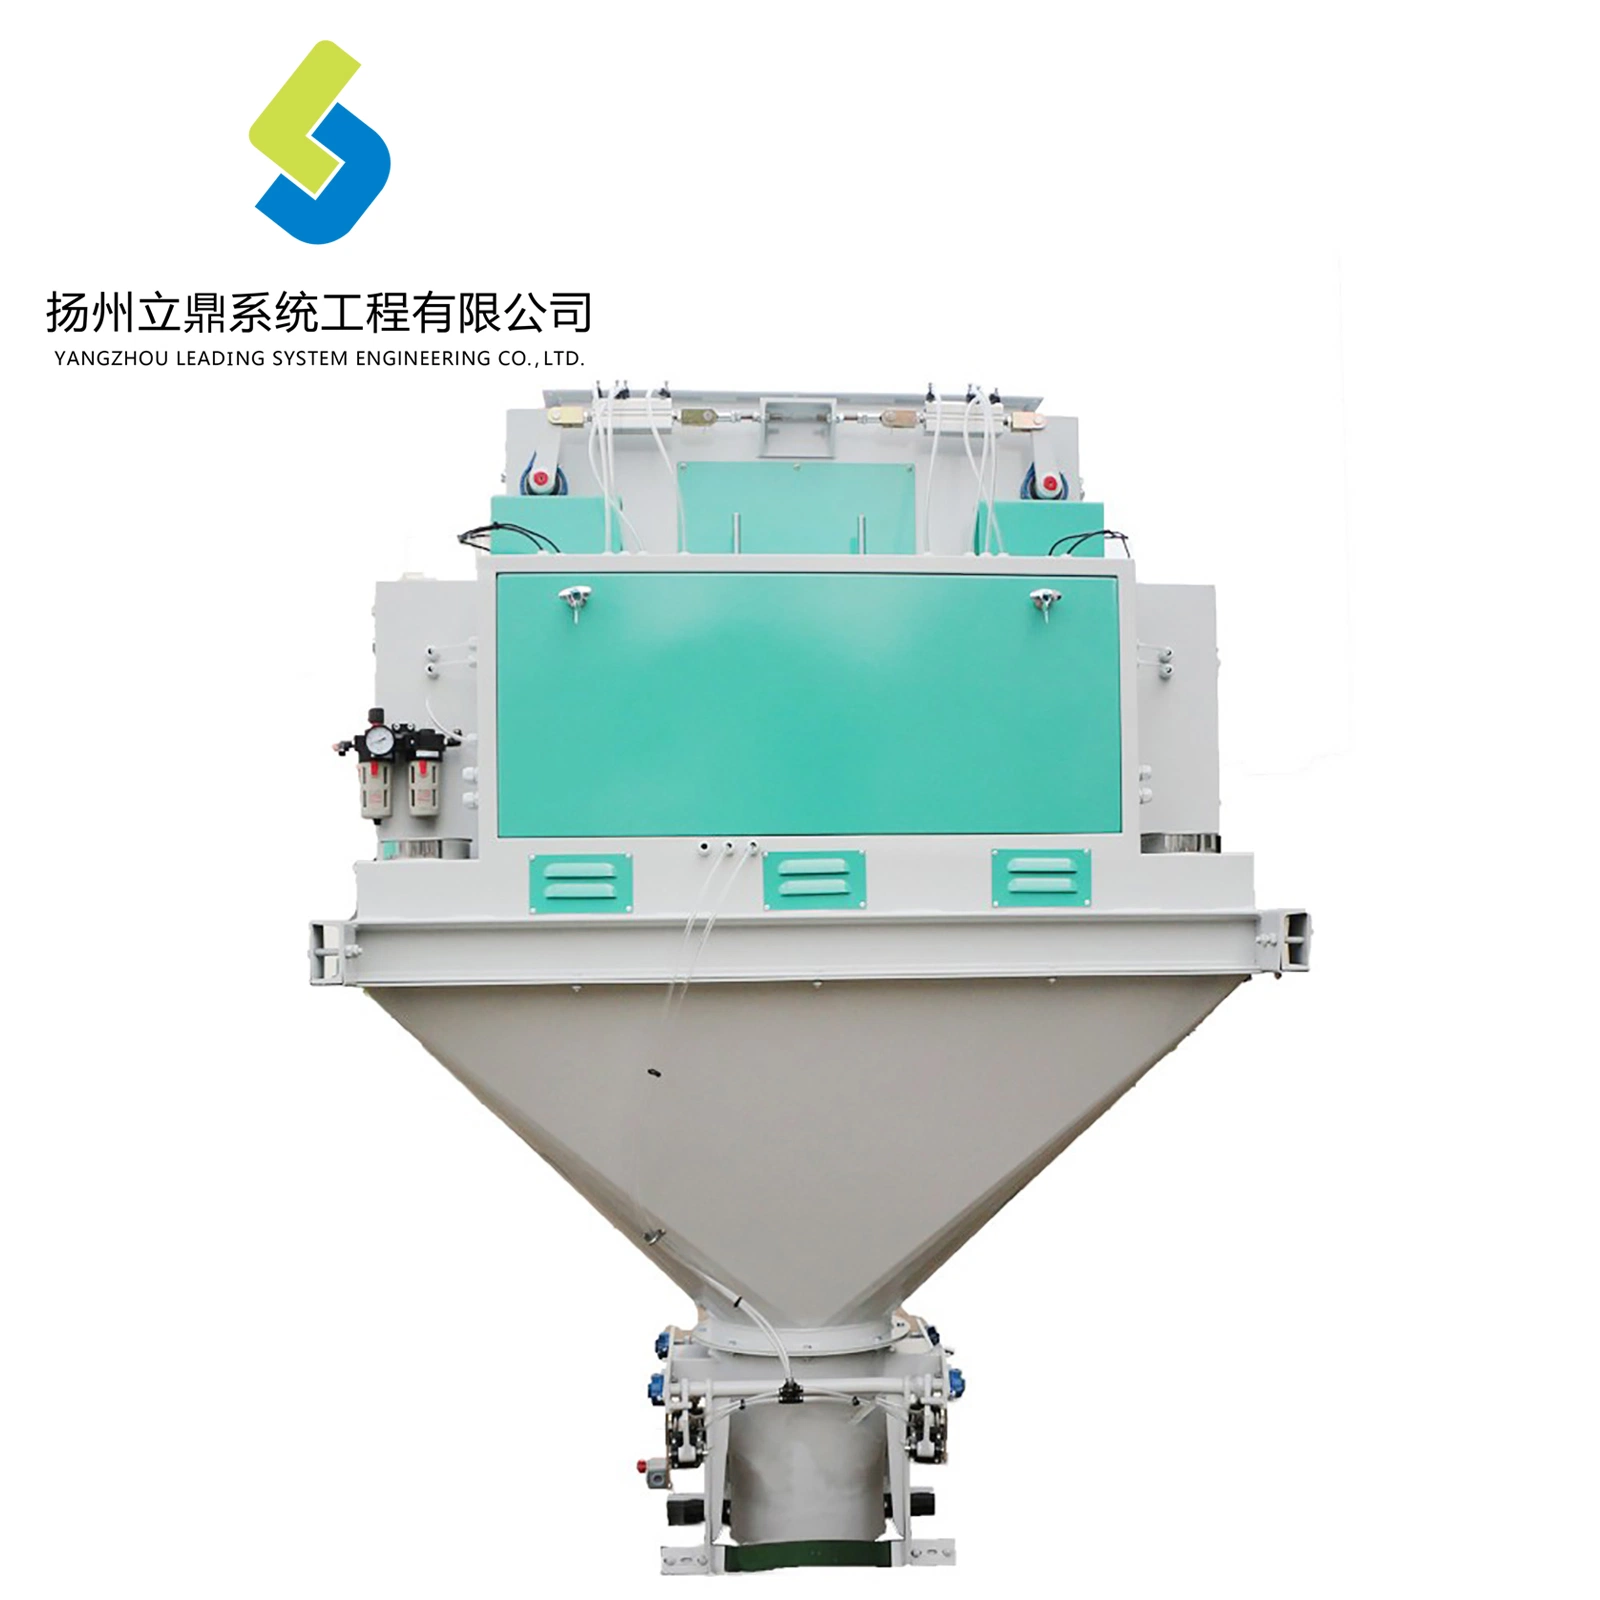 Two Scale Hopper in Free Falling Way of Feed Computer Control Weighing Scale Machine